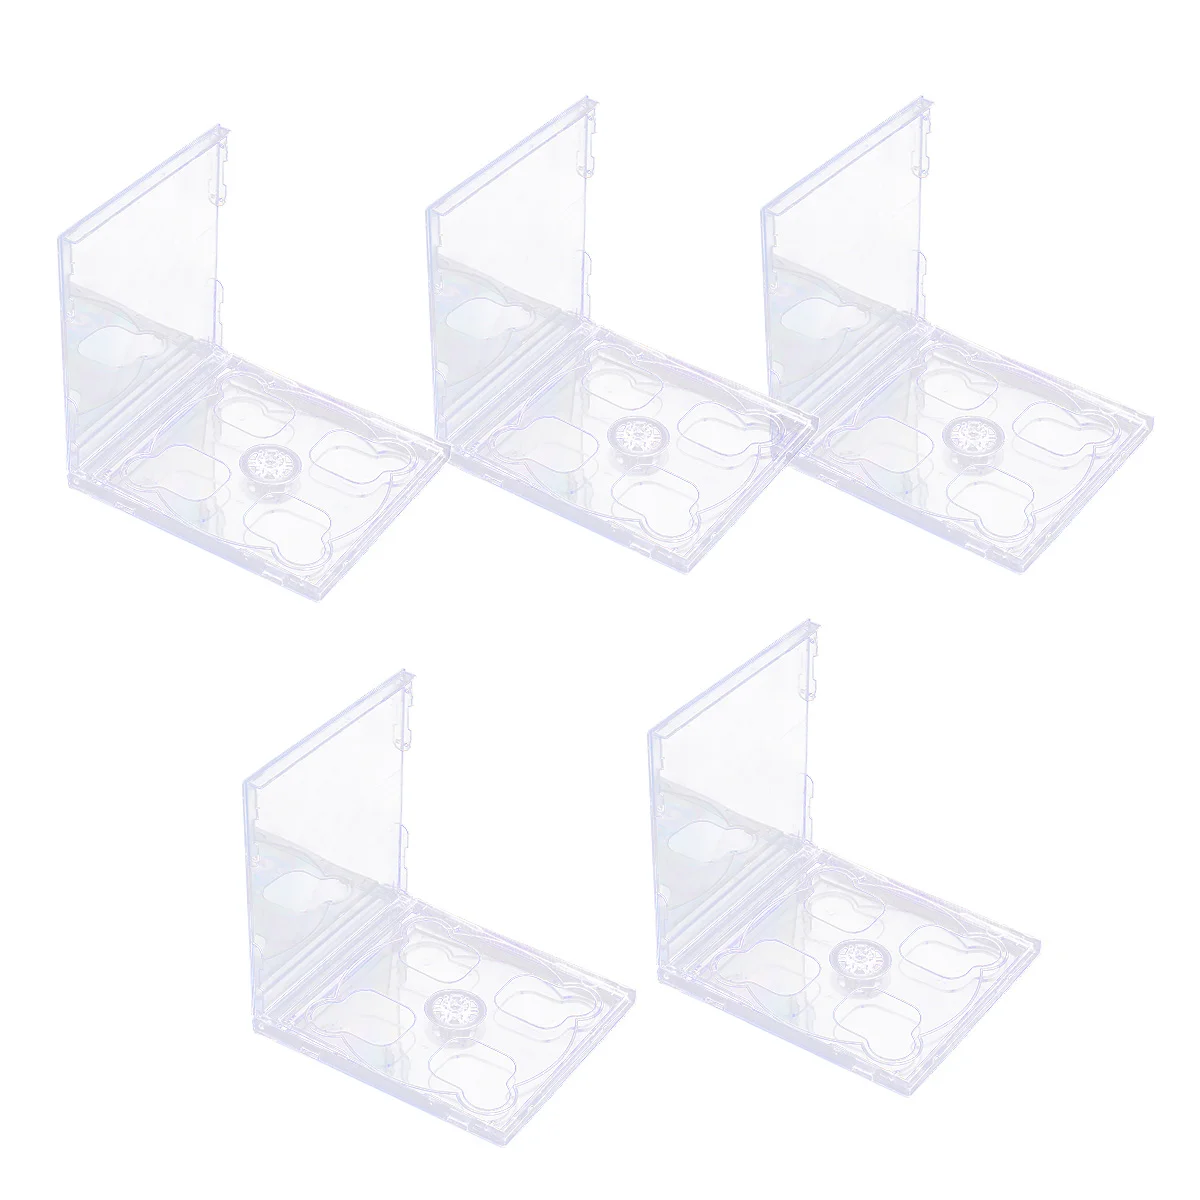 5pcs Dual CD Jewel Case with Assembled Clear Tray Standard Empty Clear Replacement DVD Case Portable Transparent Cd Cover Case